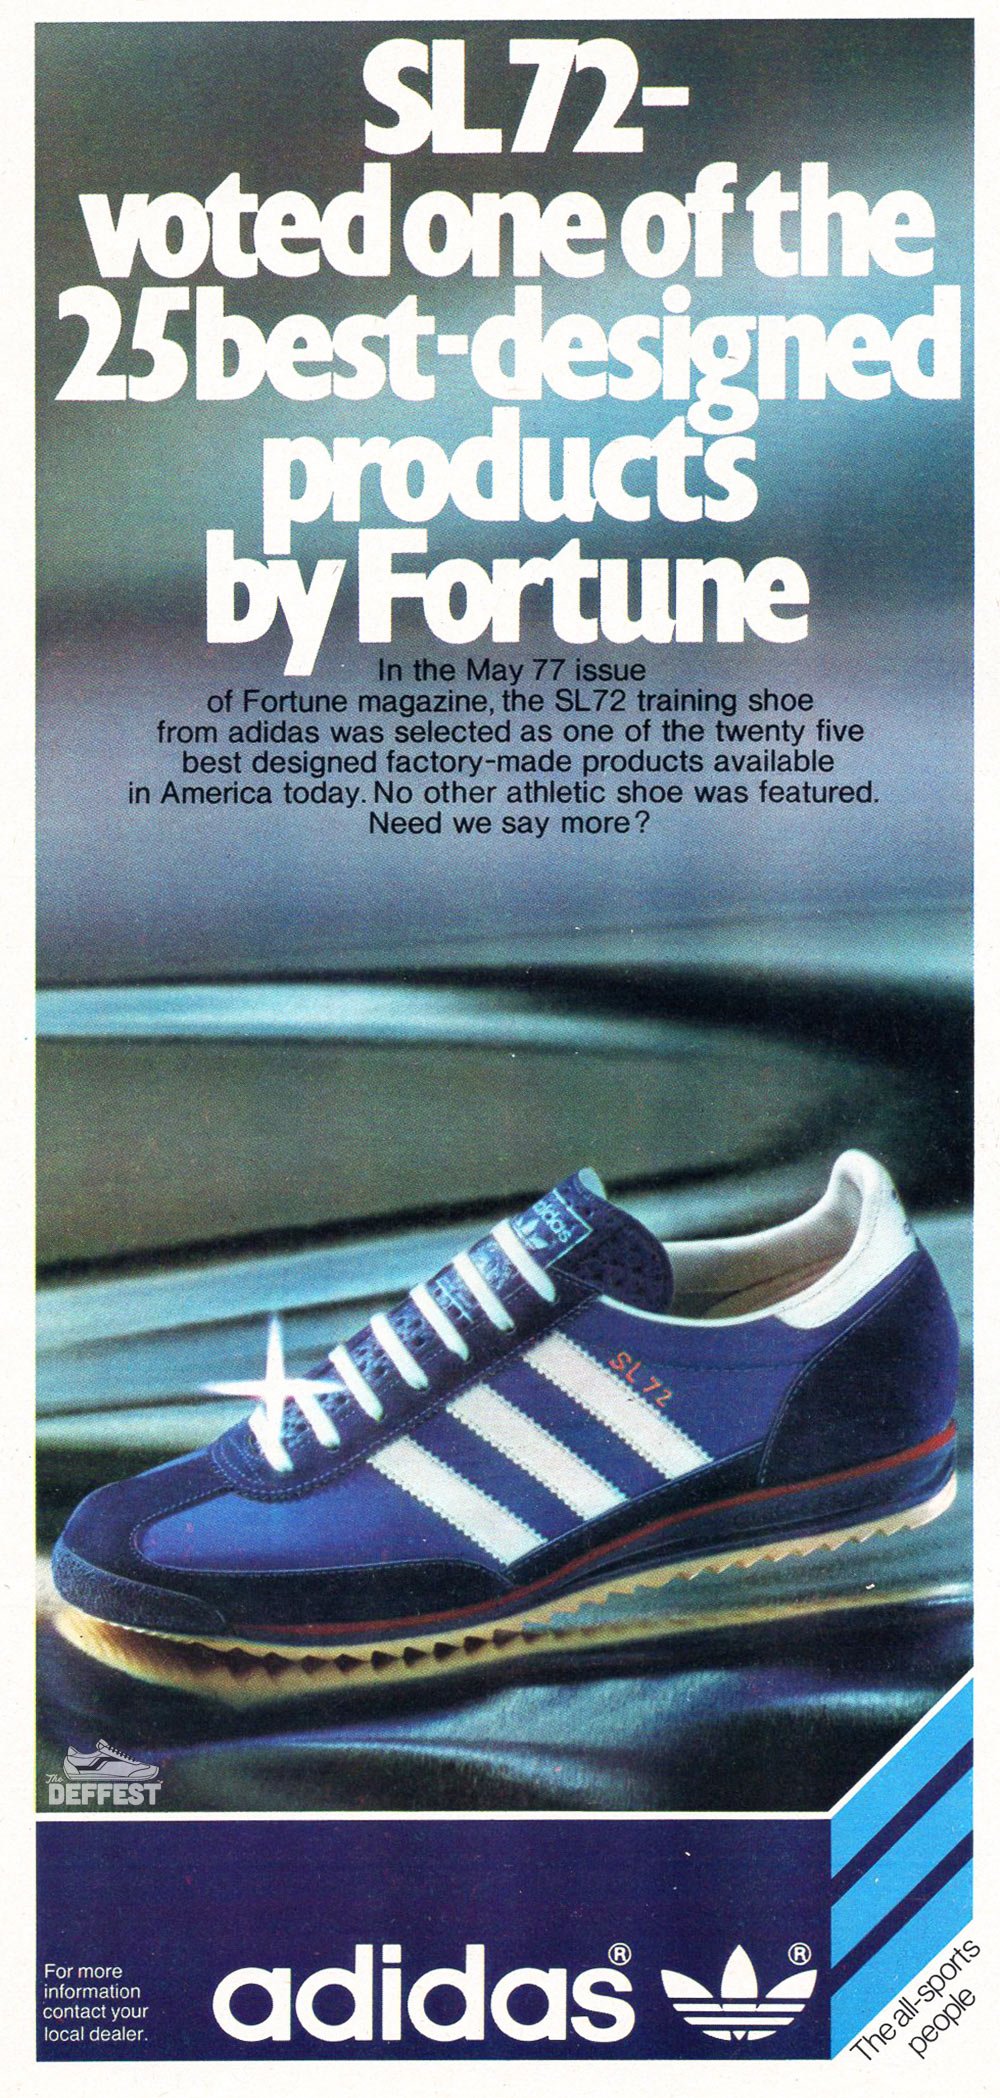 adidas sl72 — The Deffest®. A vintage and retro sneaker blog. — Vintage Ads